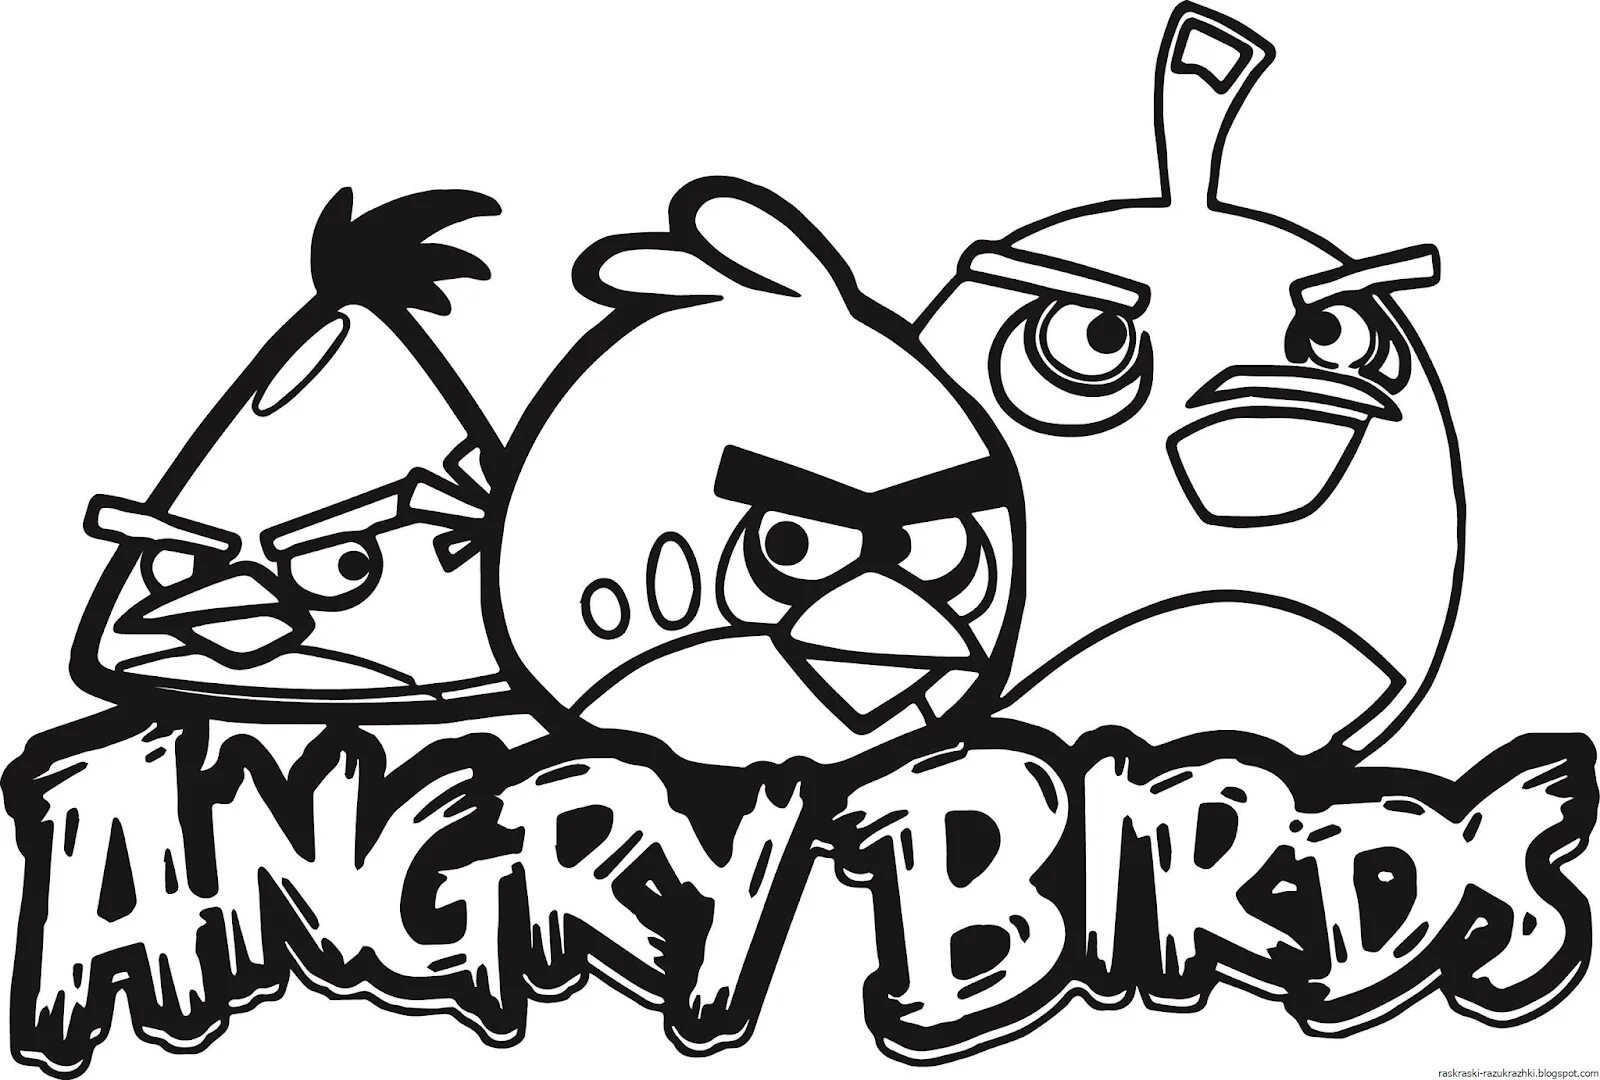 Angry birds 2 #10